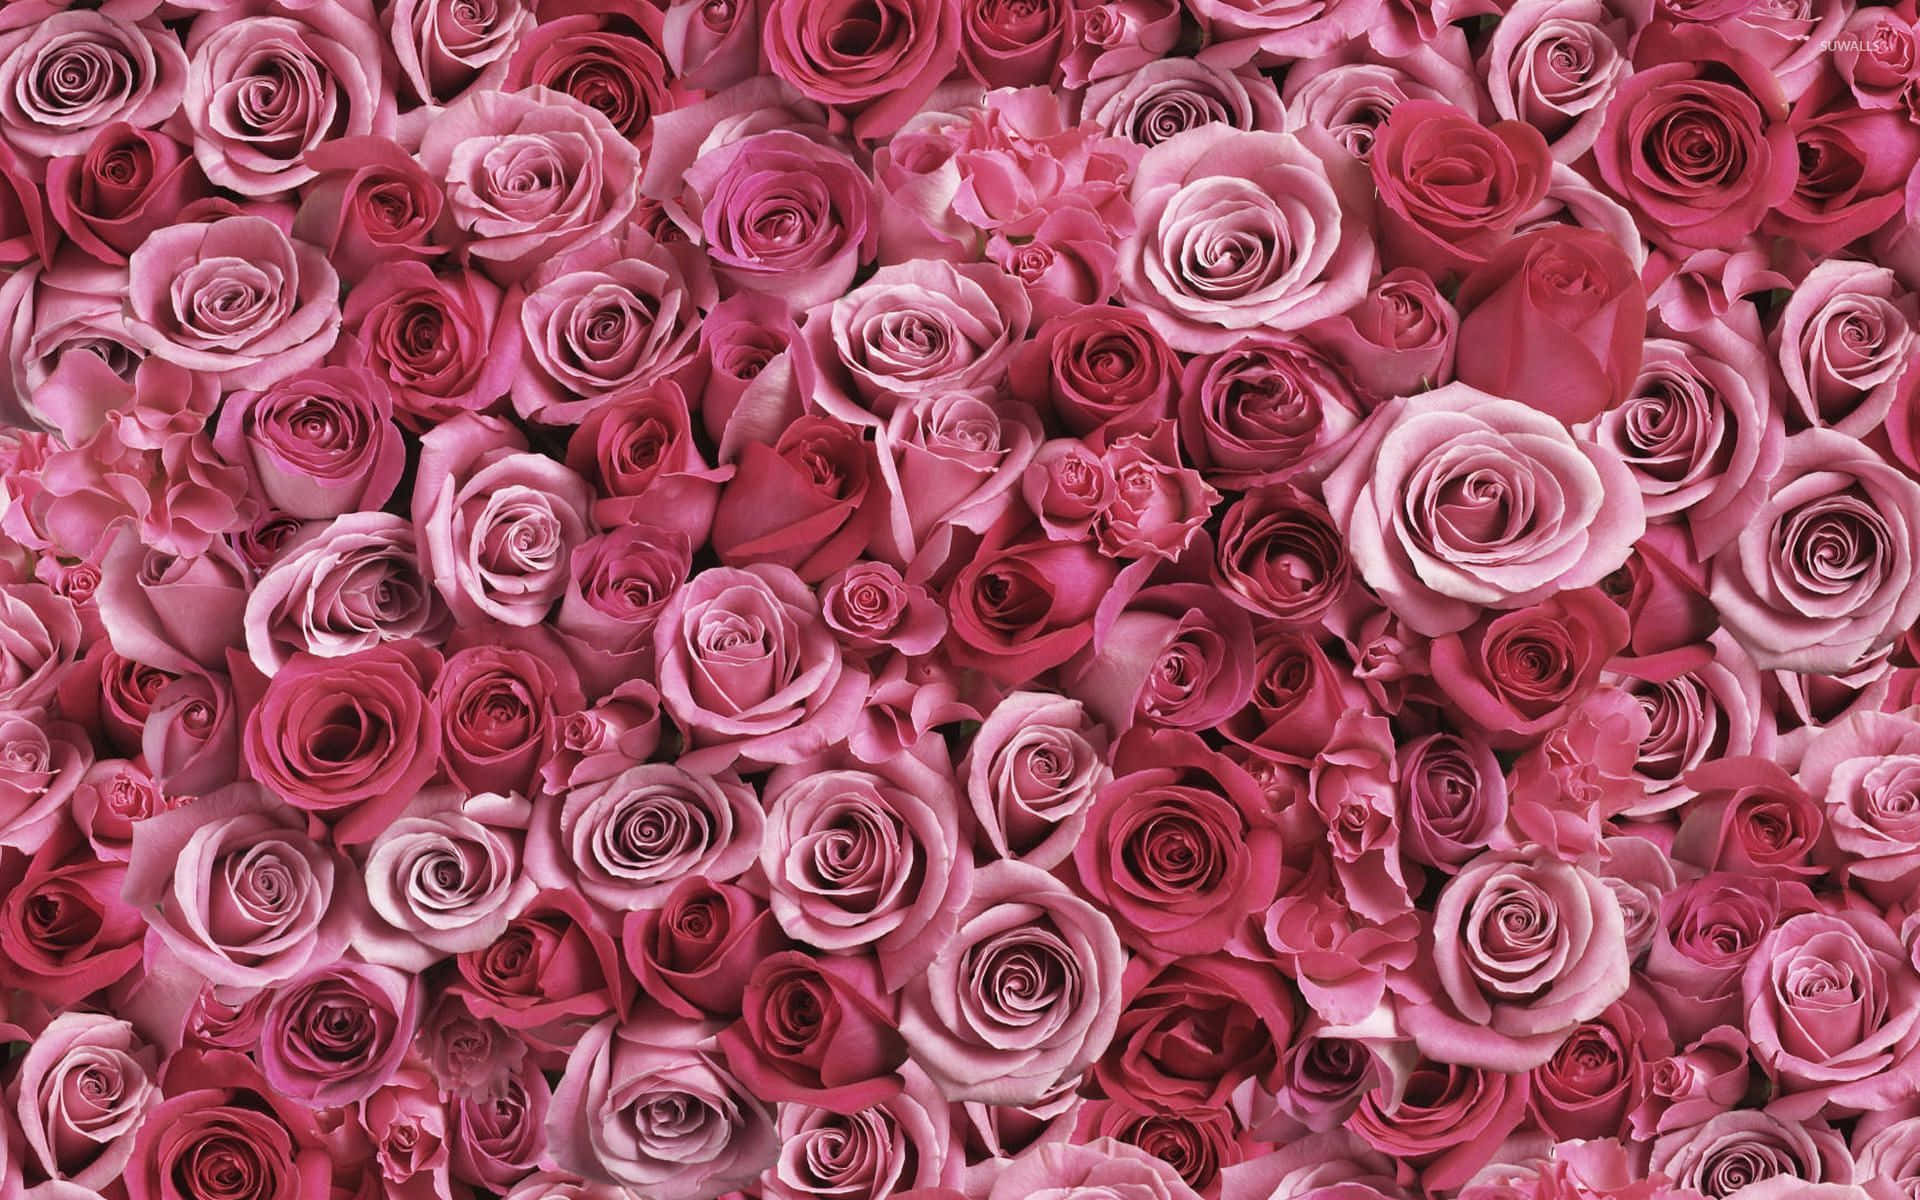 Different Shades Of Pink Roses Background